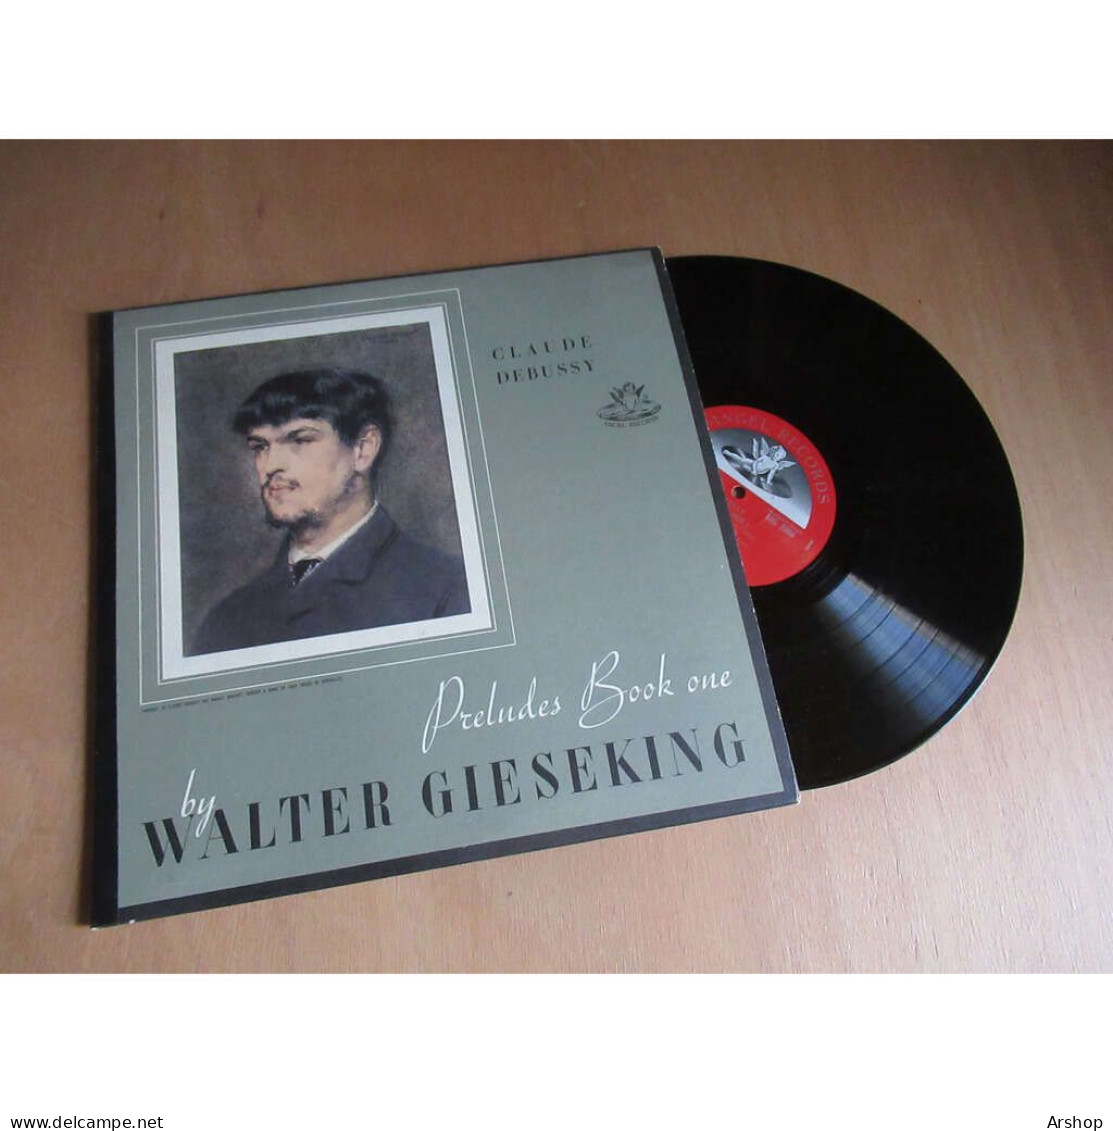 WALTER GIESEKING Preludes Book One DEBUSSY Piano Classique - ANGEL 35066 US Lp - Clásica